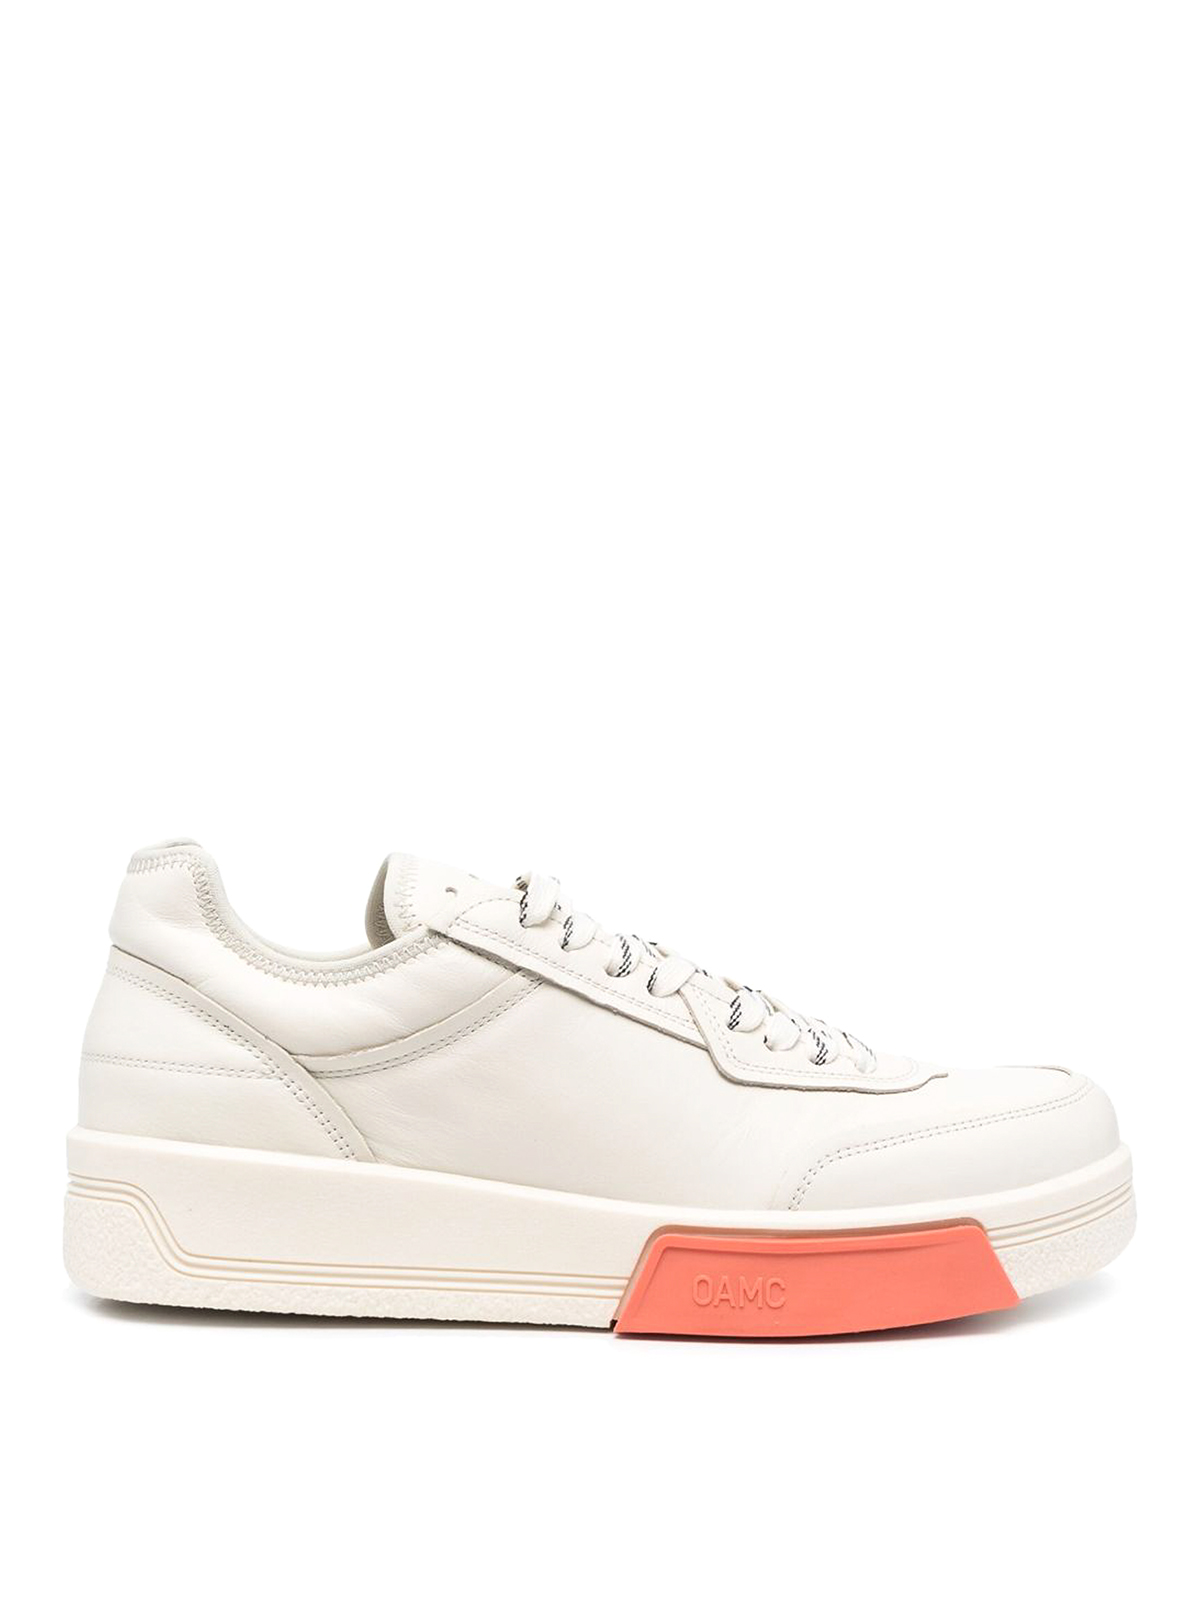 Oamc Trainers White